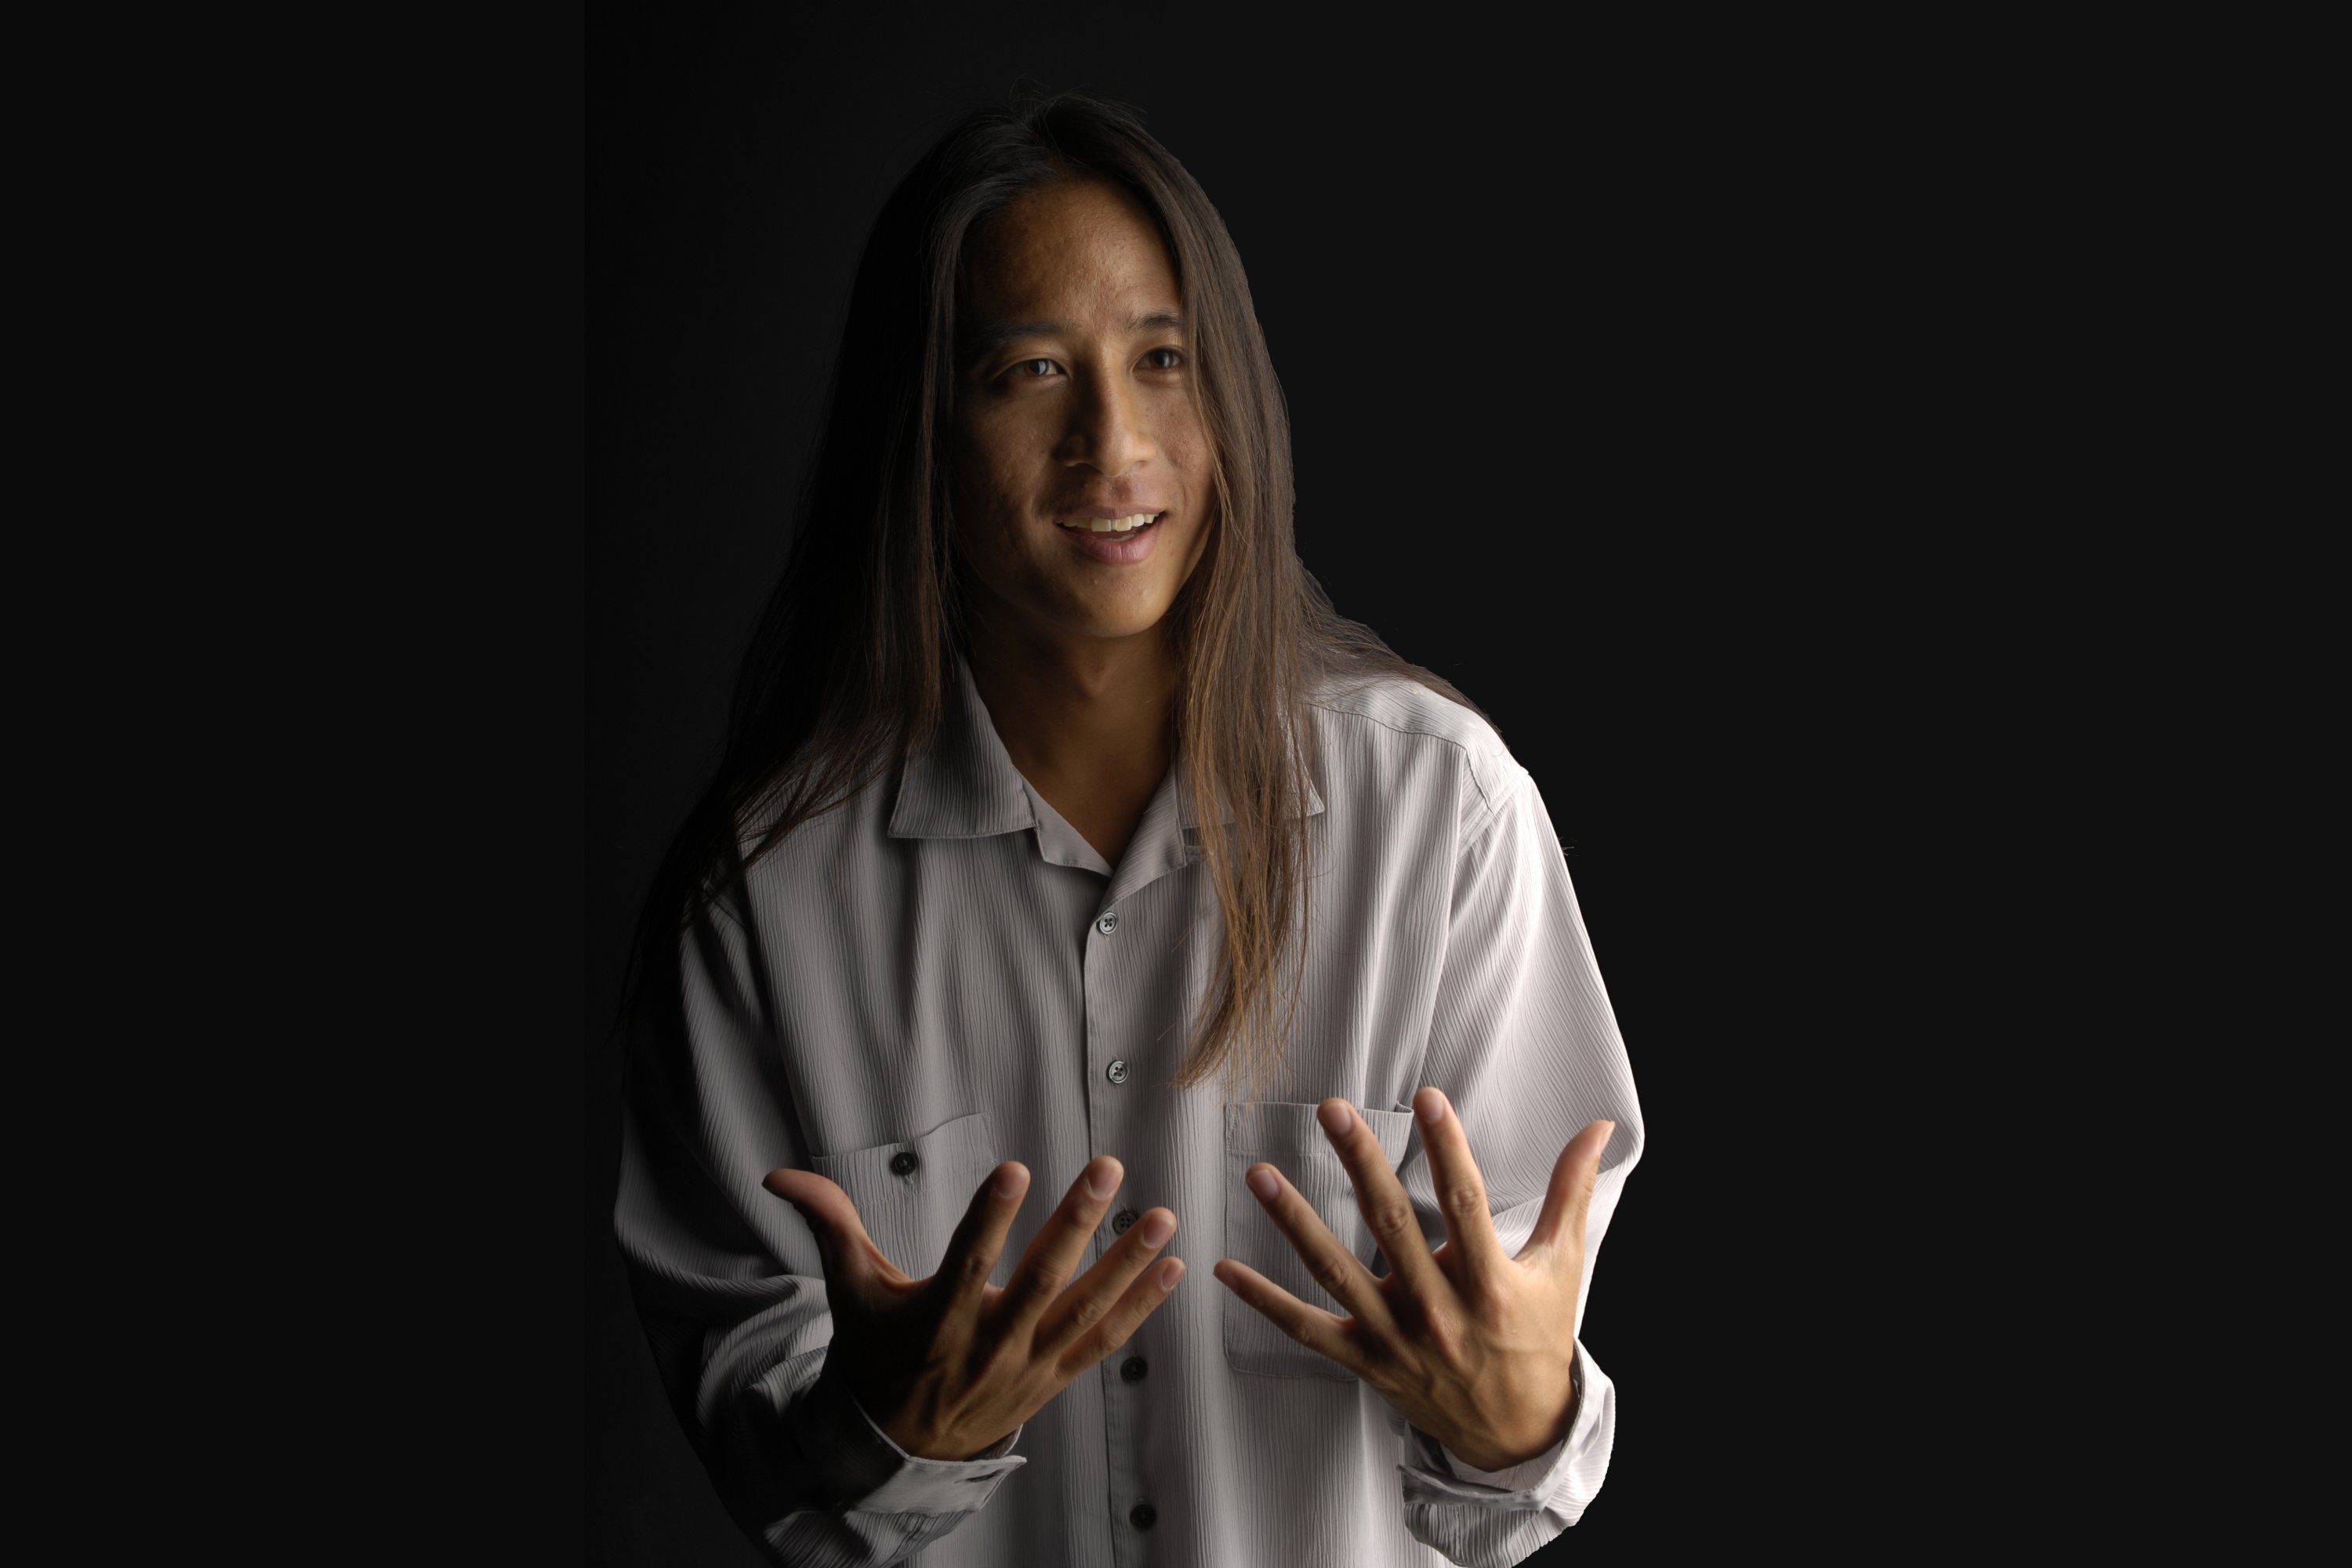 Poet Kealoha Wong ’99 to speak at the MIT Classes of 2020 and 2021 Graduation Celebration